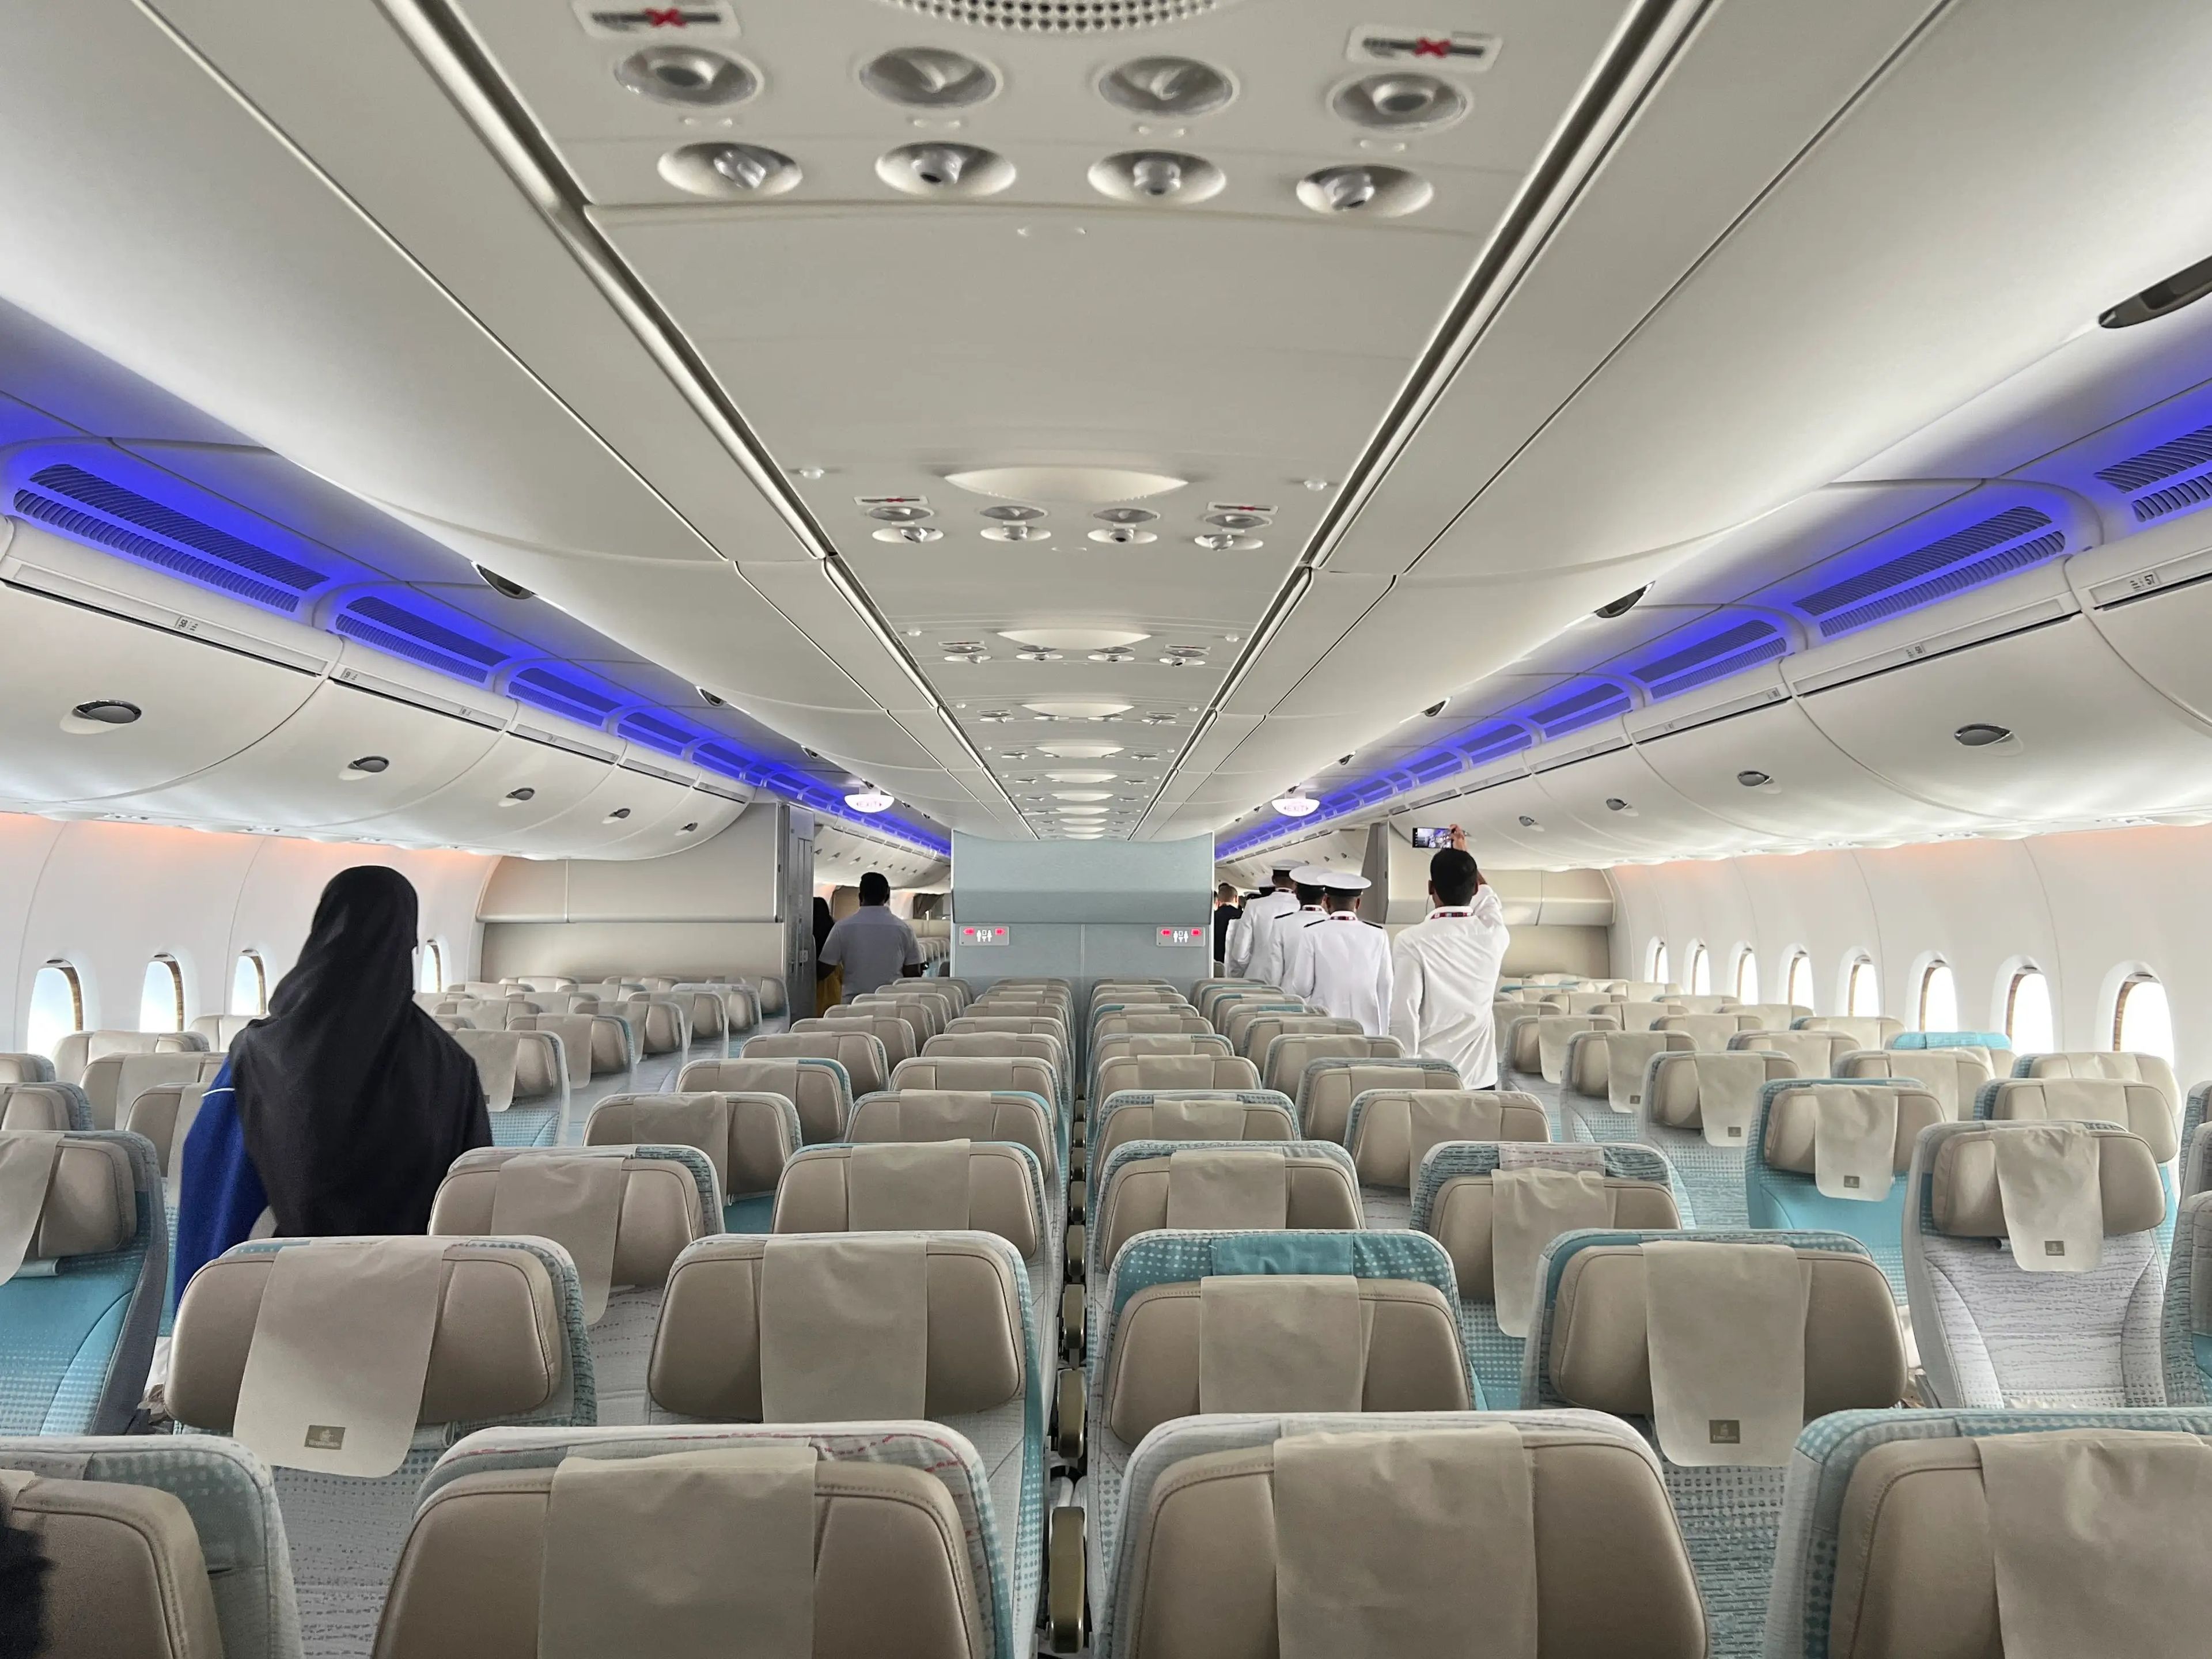 The economy cabin on an Emirates A380 features cyan and grey seats in a 3-4-3 layout.